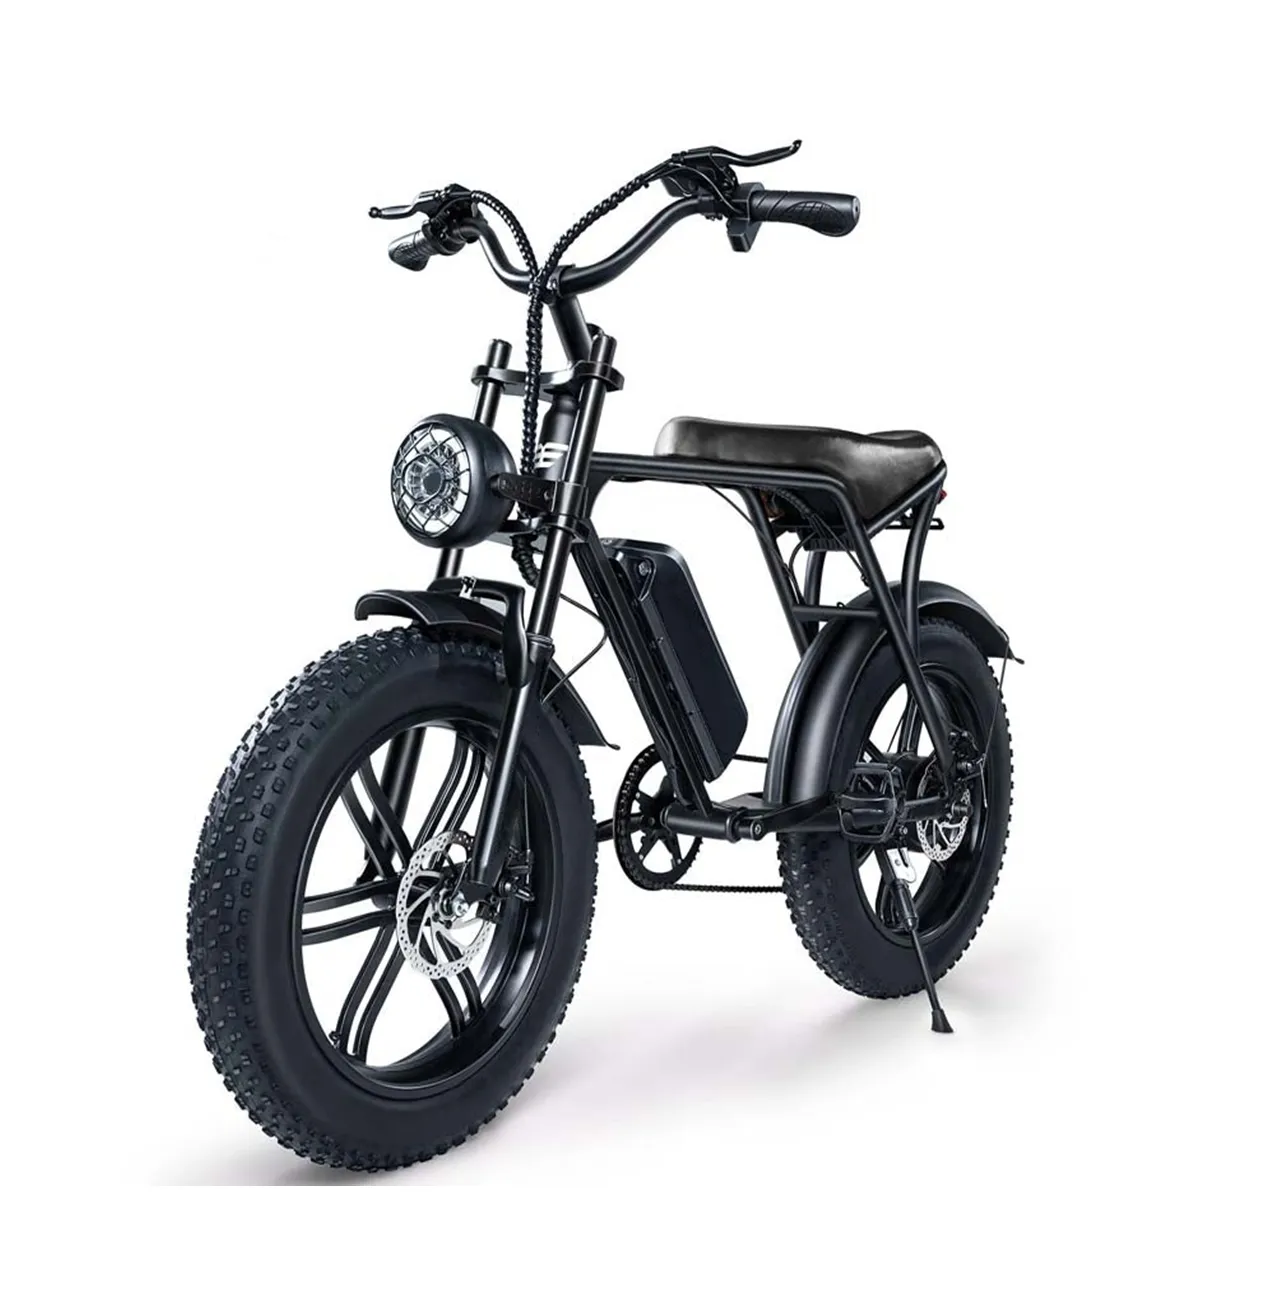 Hot Sale Fat Bike 750W Electric Bicycle with 48V 15Ah Battery 48km/H Speed Pedals Moped Bicicleta Eletrica